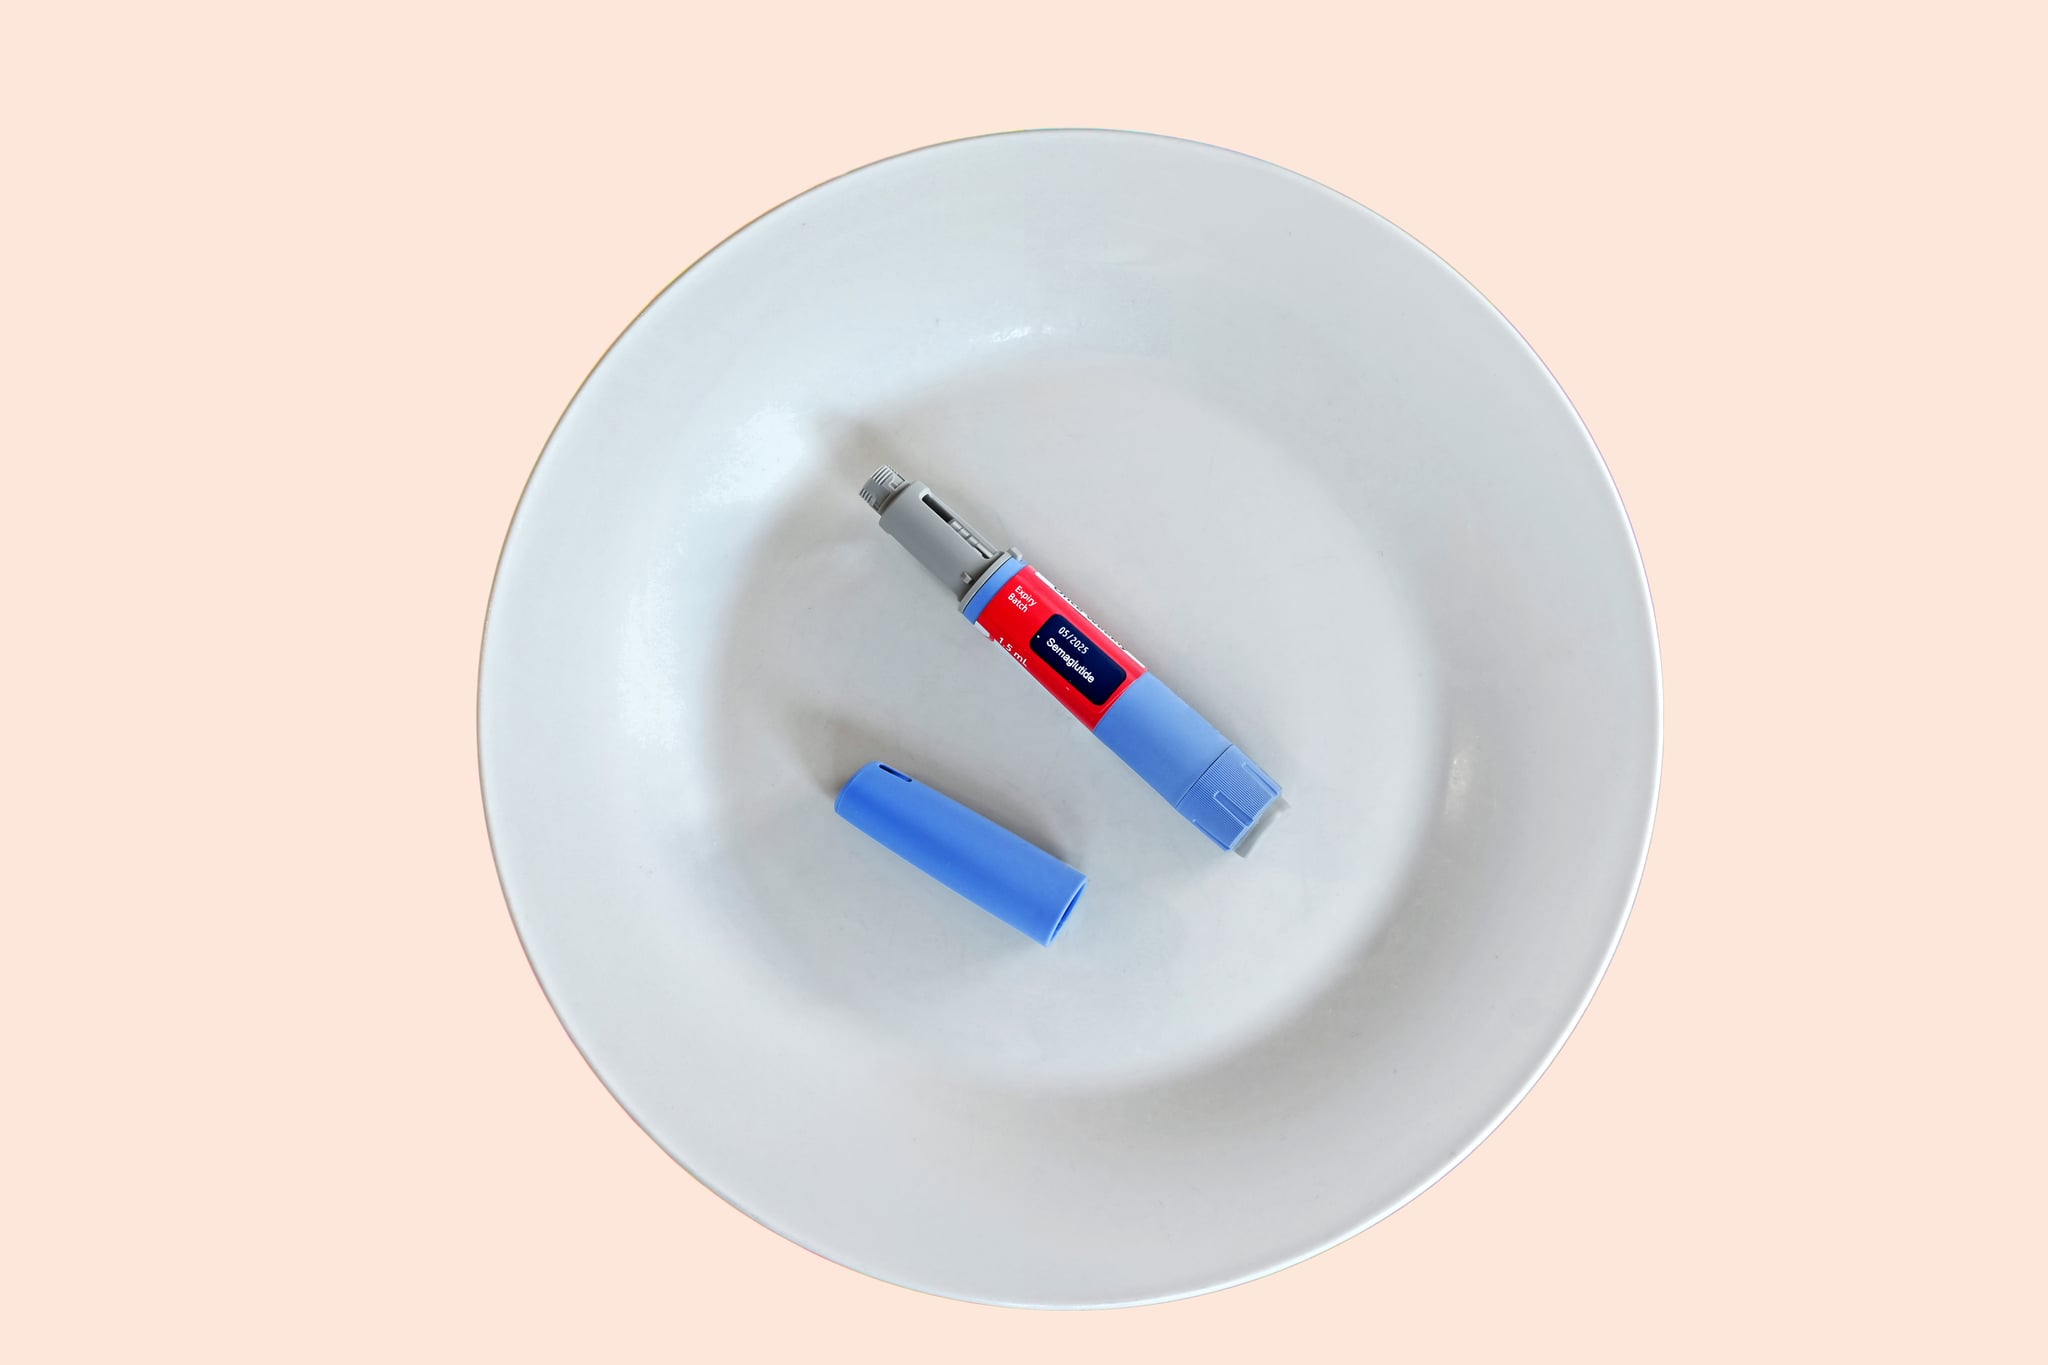 Semaglutide injecting  pen with lid on a white plate